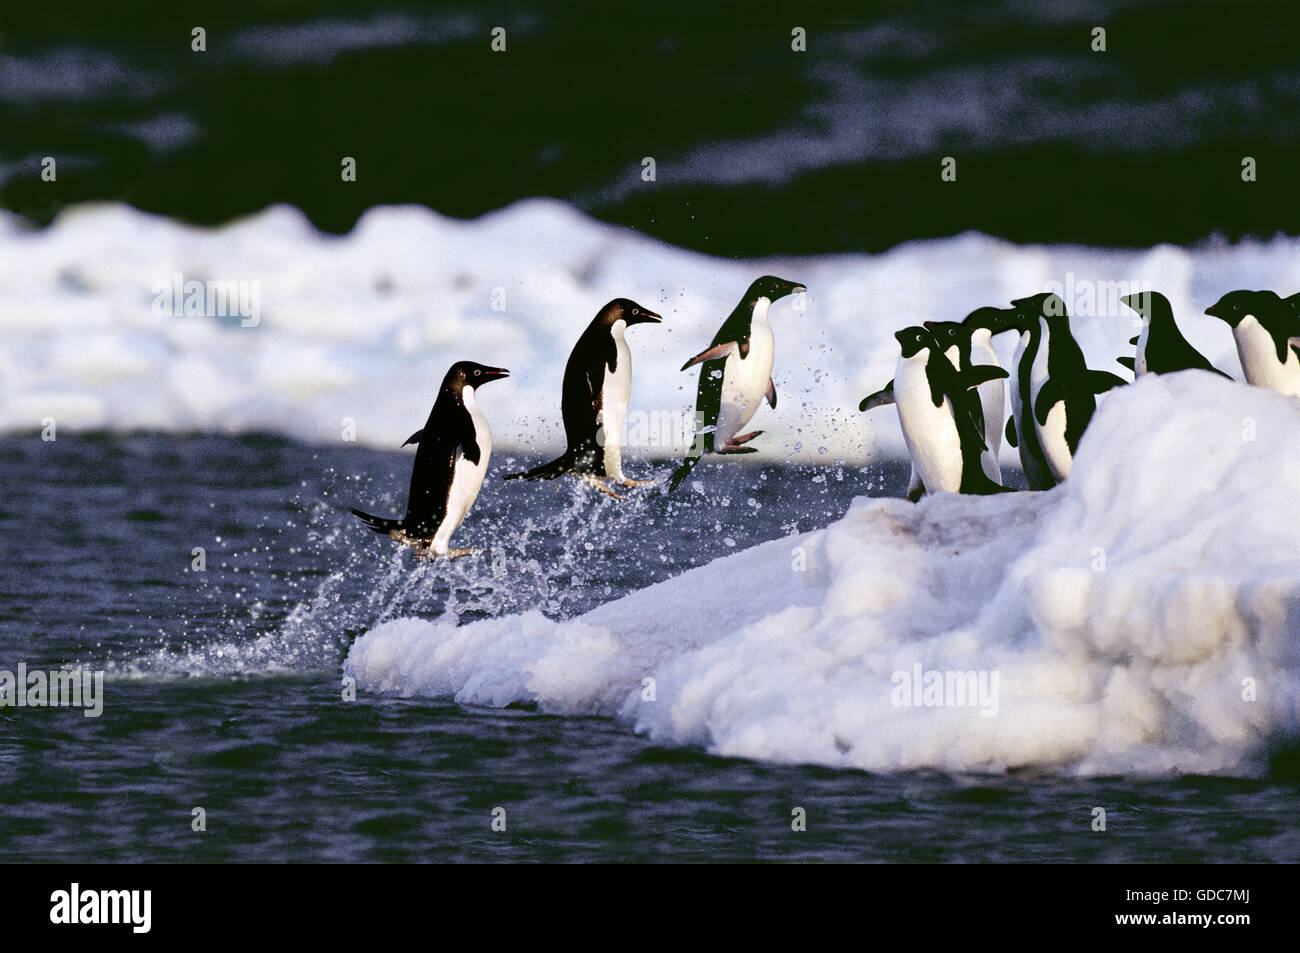 ADELIE PENGUIN pygoscelis adeliae, GROUP LEAPING OUT OF WATER, ANTARCTICA Stock Photo